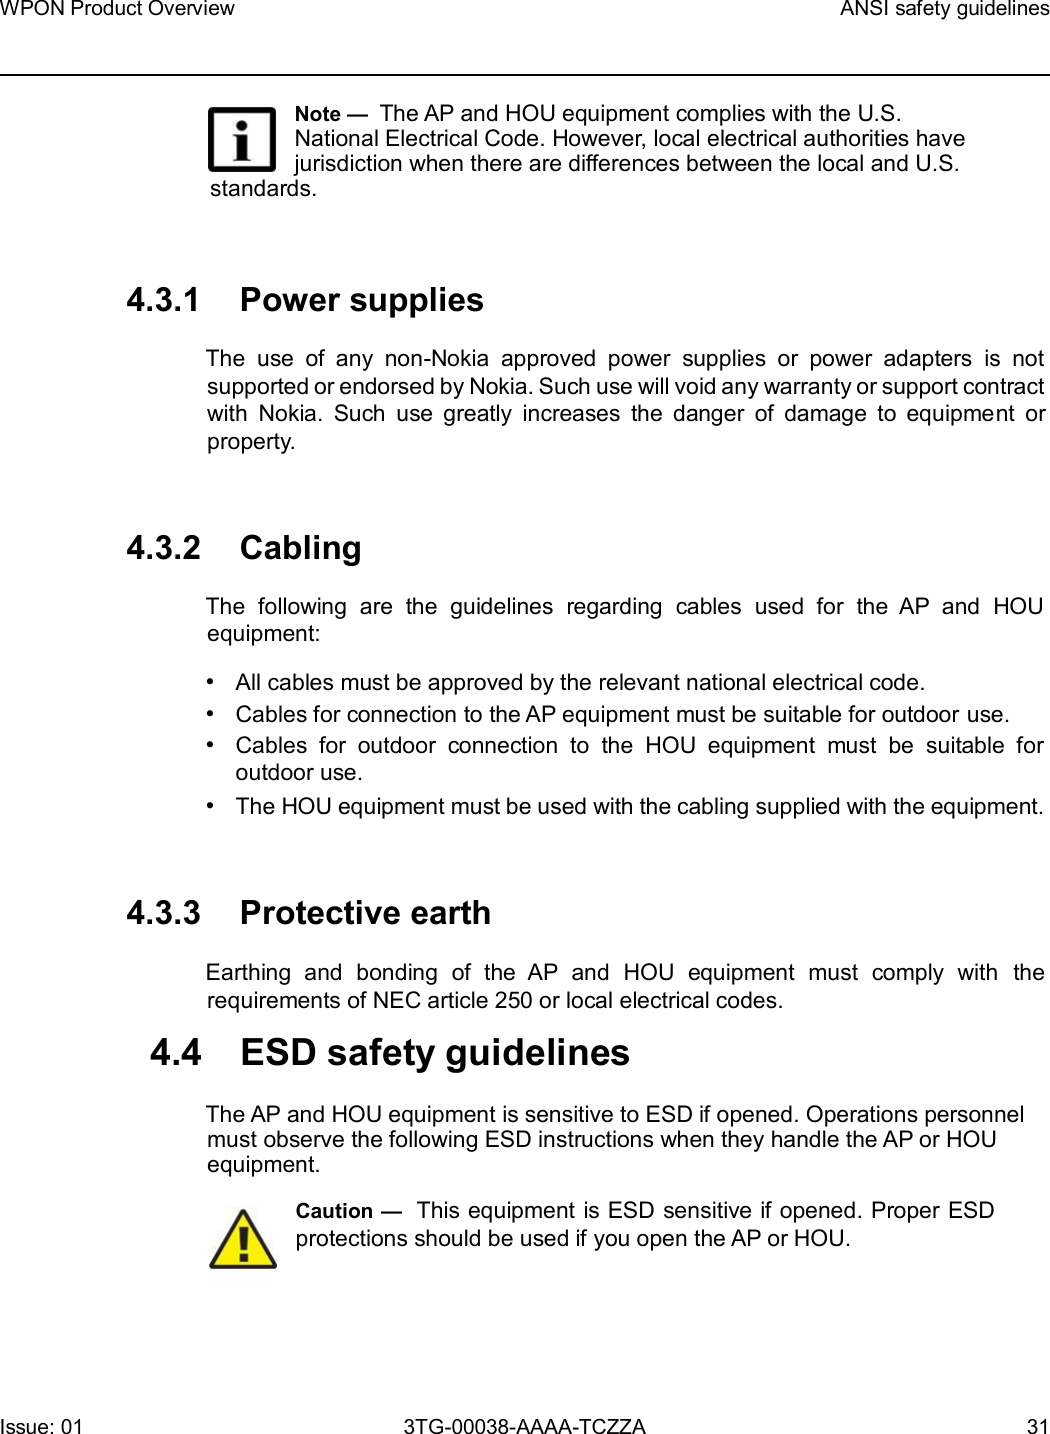 Page 31 of Nokia Bell 7577WPONAPAC WPON User Manual WPON Product Overview